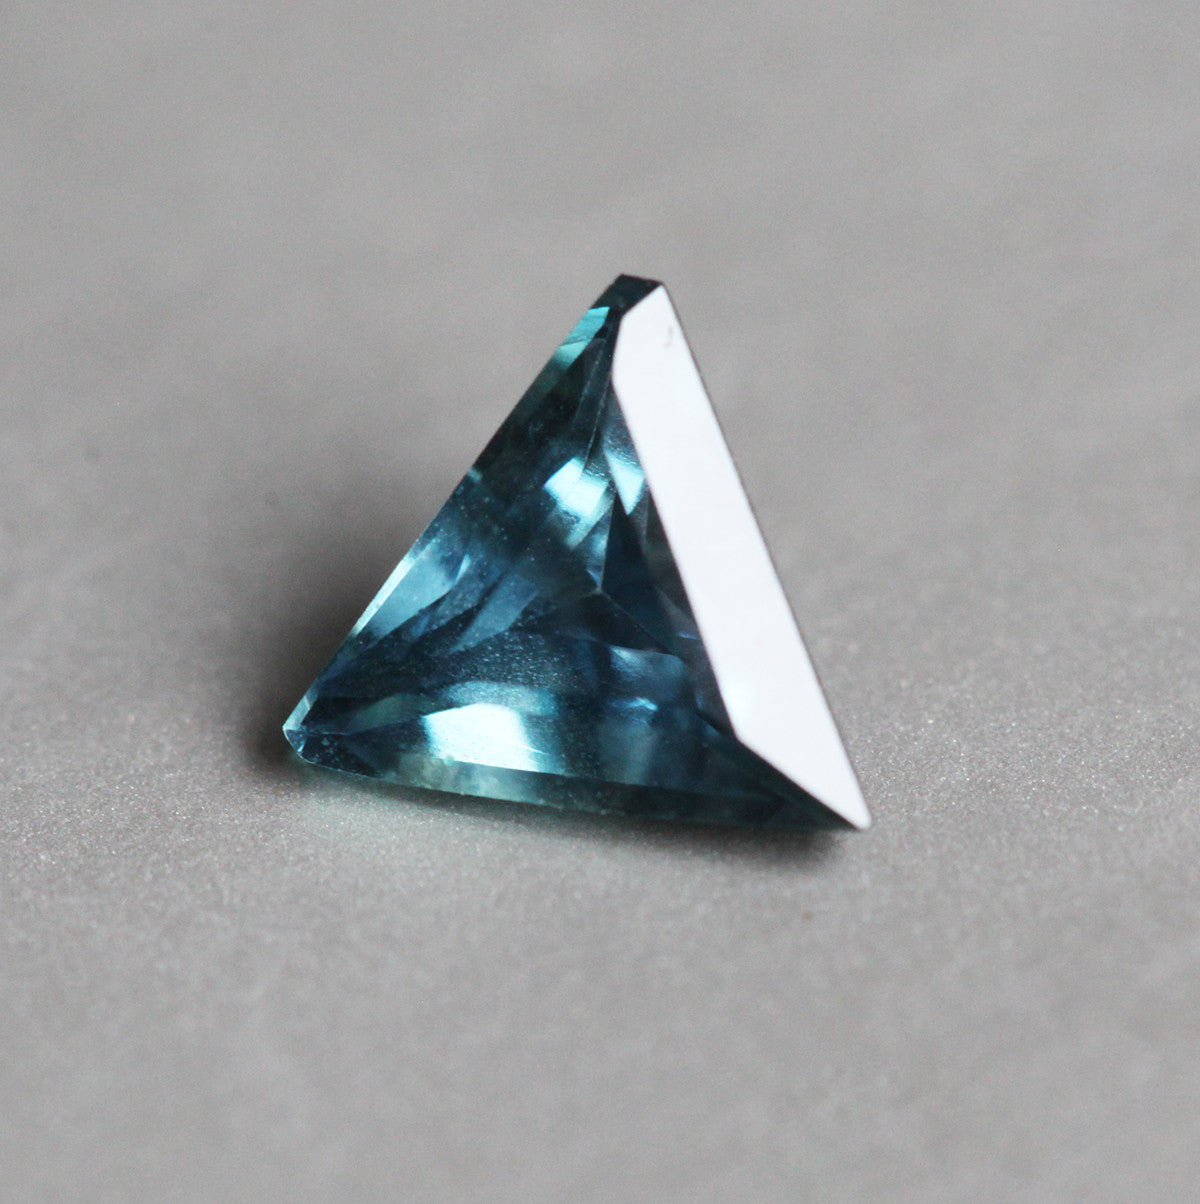 Loose triangle-shaped teal sapphire